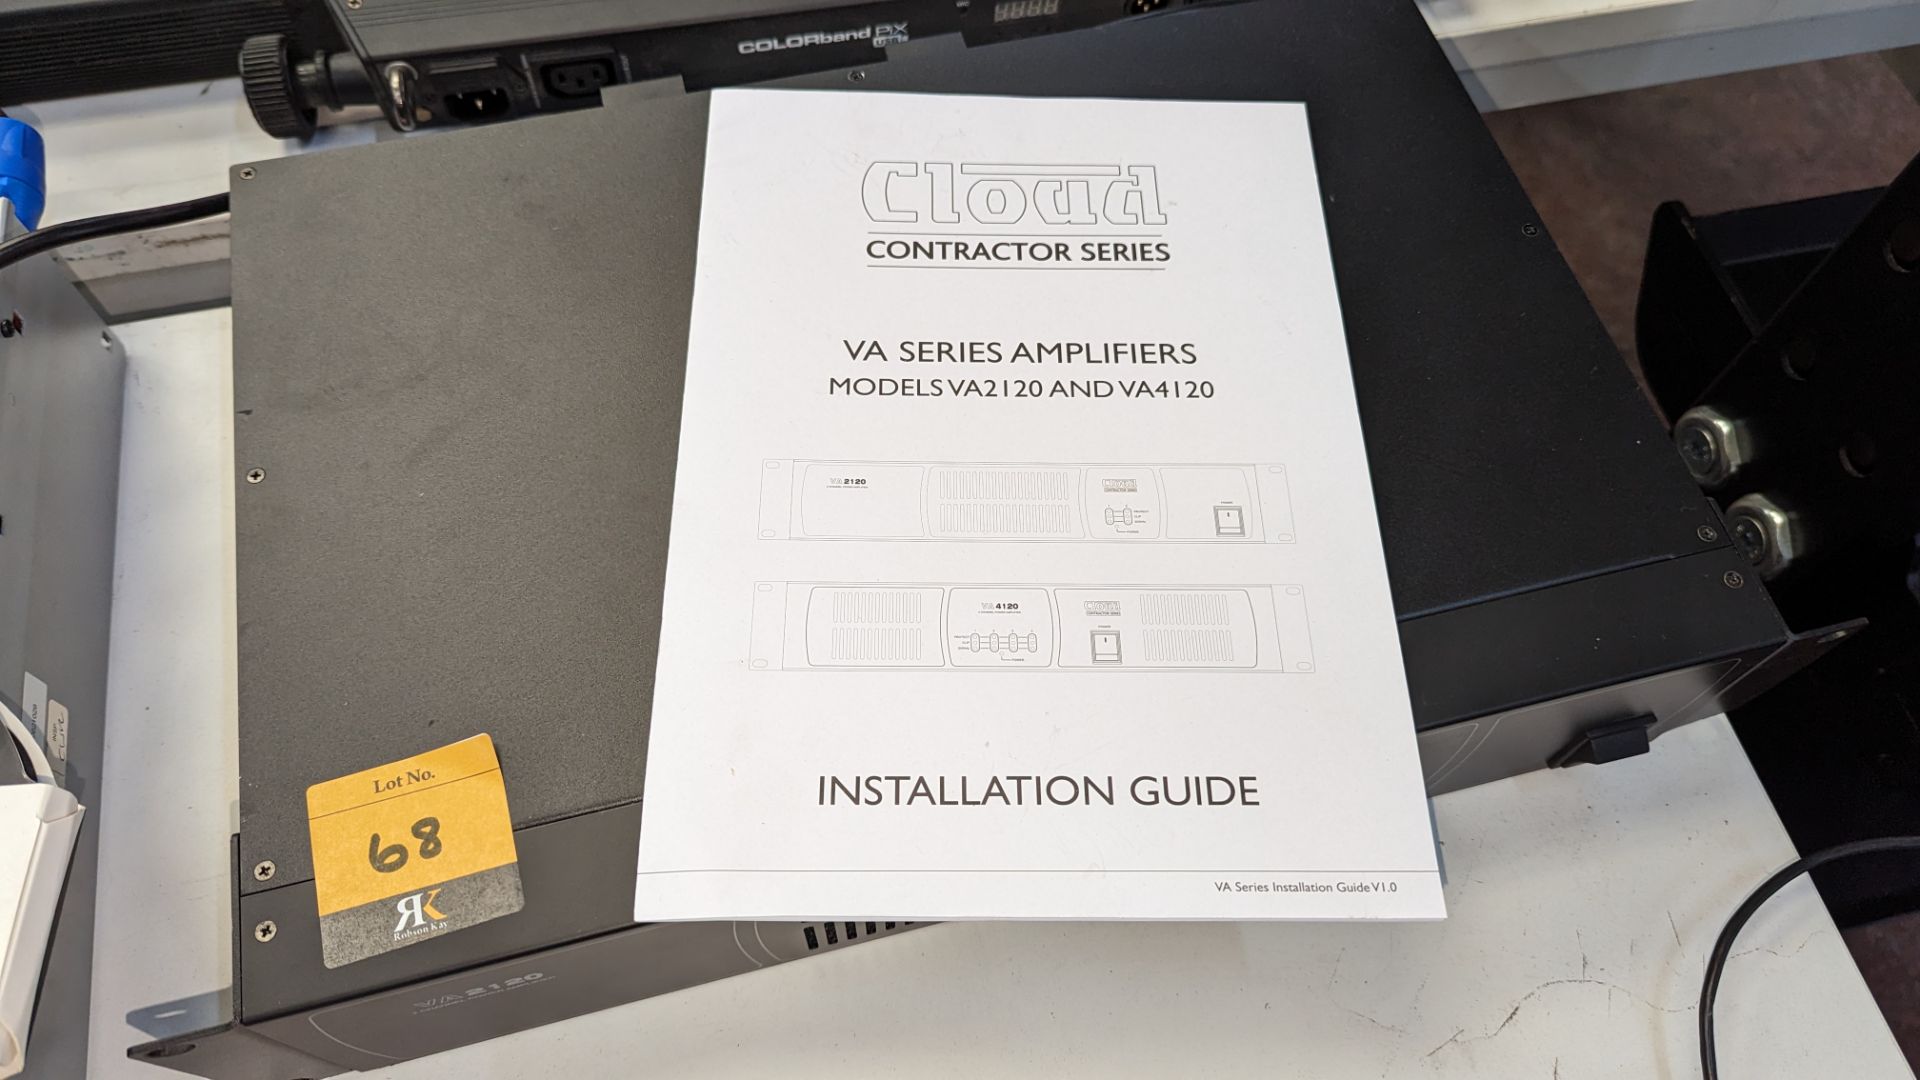 Cloud Contractor Series amplifier model VA2120, including rack mounting ears and installation guide - Image 9 of 9